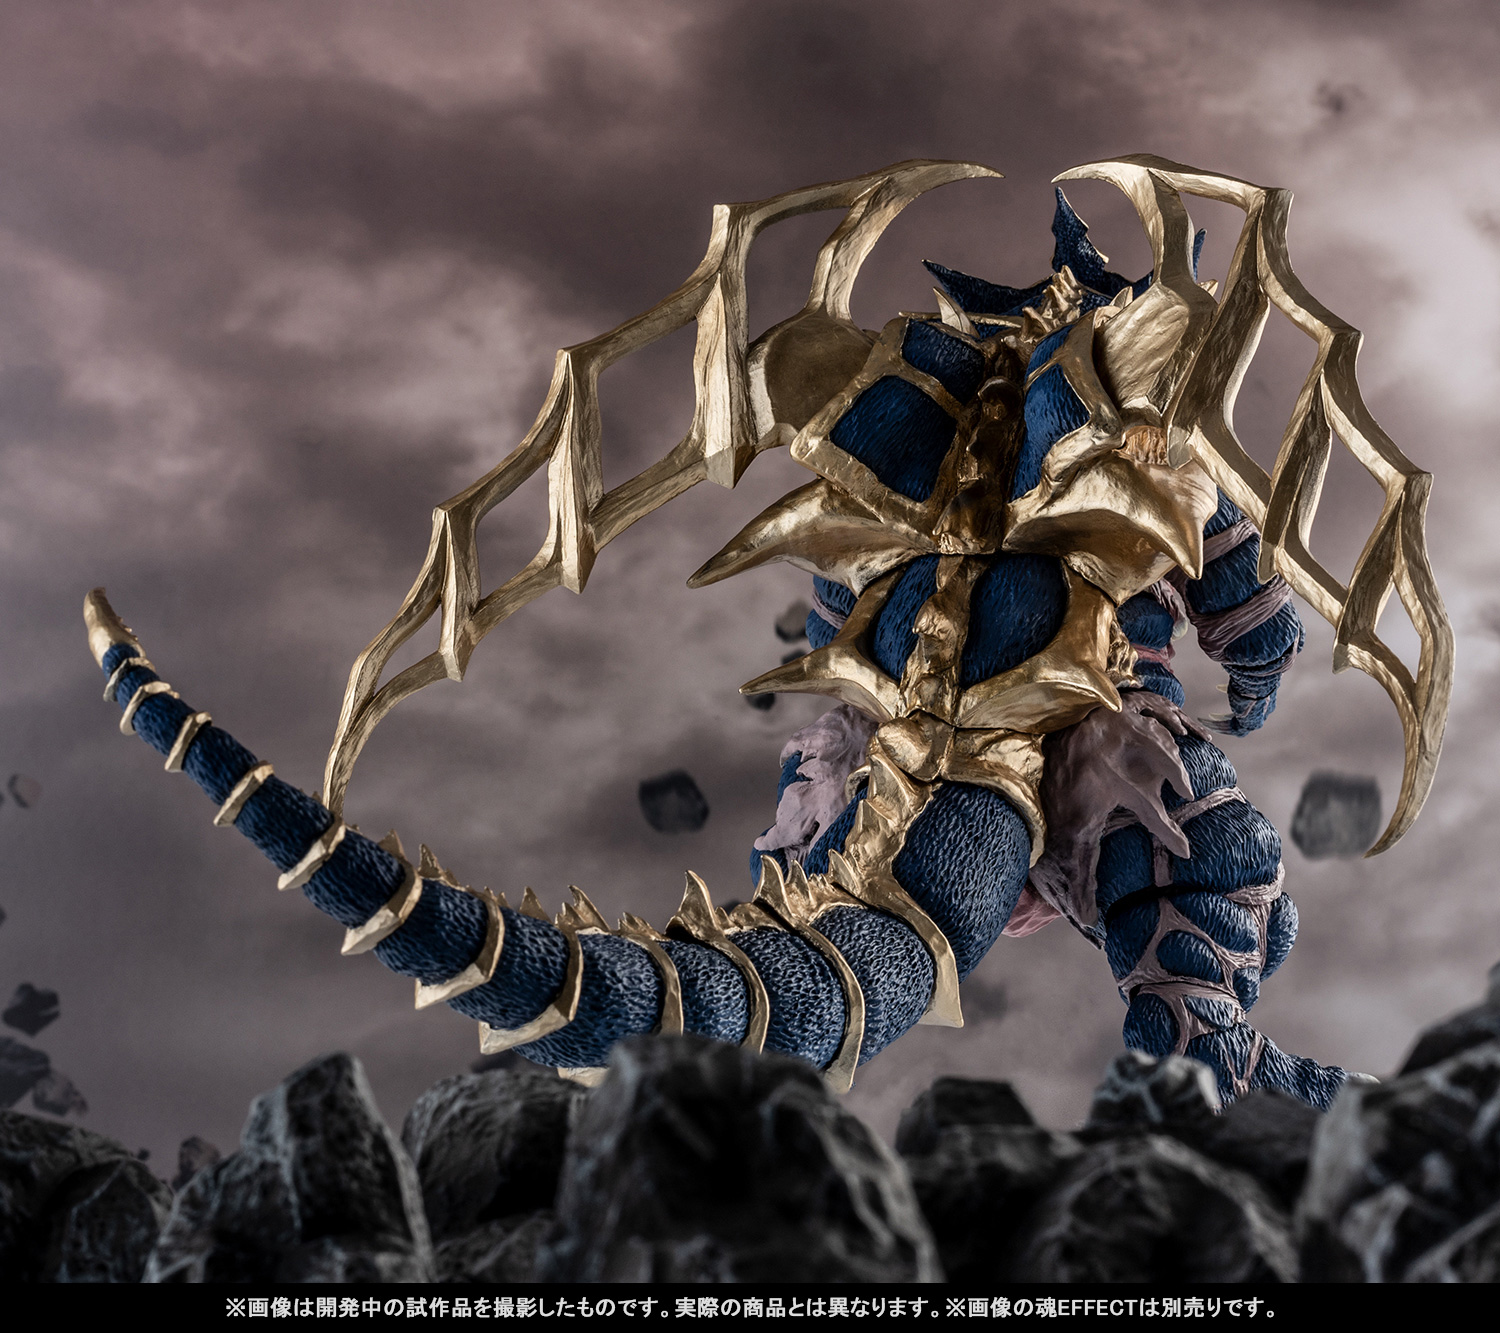 Destroy everything in the world! The most powerful monster that transcends time and space &quot;S.H.Figuarts KING OF MONS&quot; June 26 (Wednesday) Tamashii web shop Orders start!